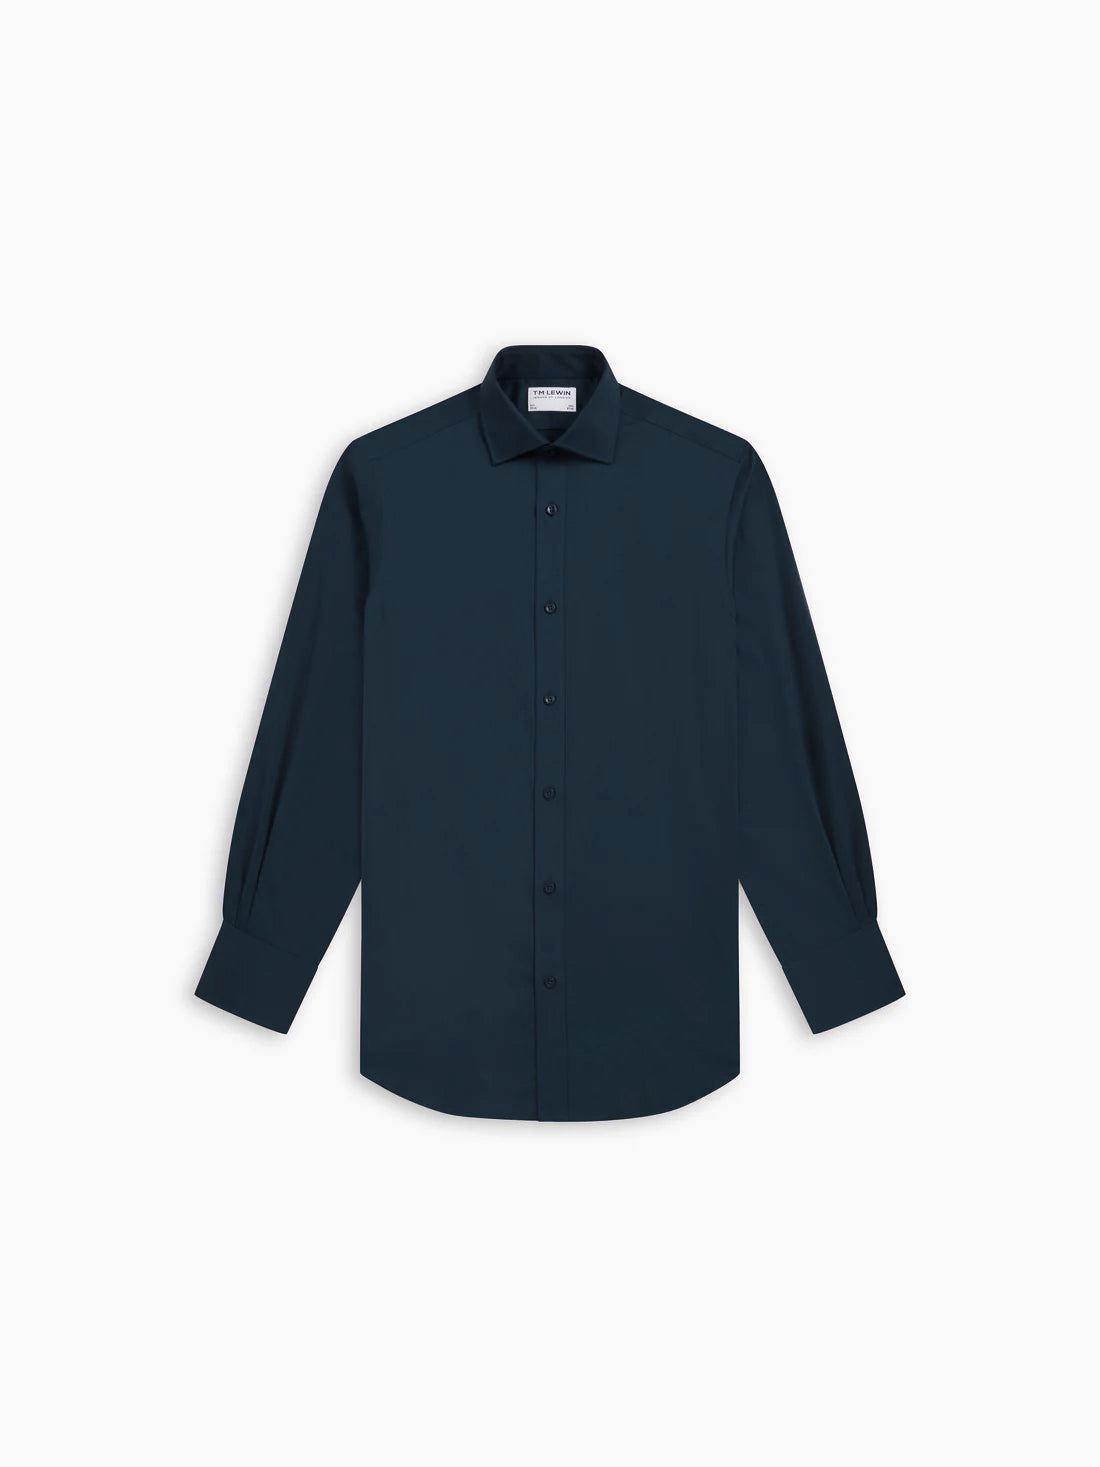 Max Performance Navy Blue Twill Fitted Single Cuff Classic Collar Shirt